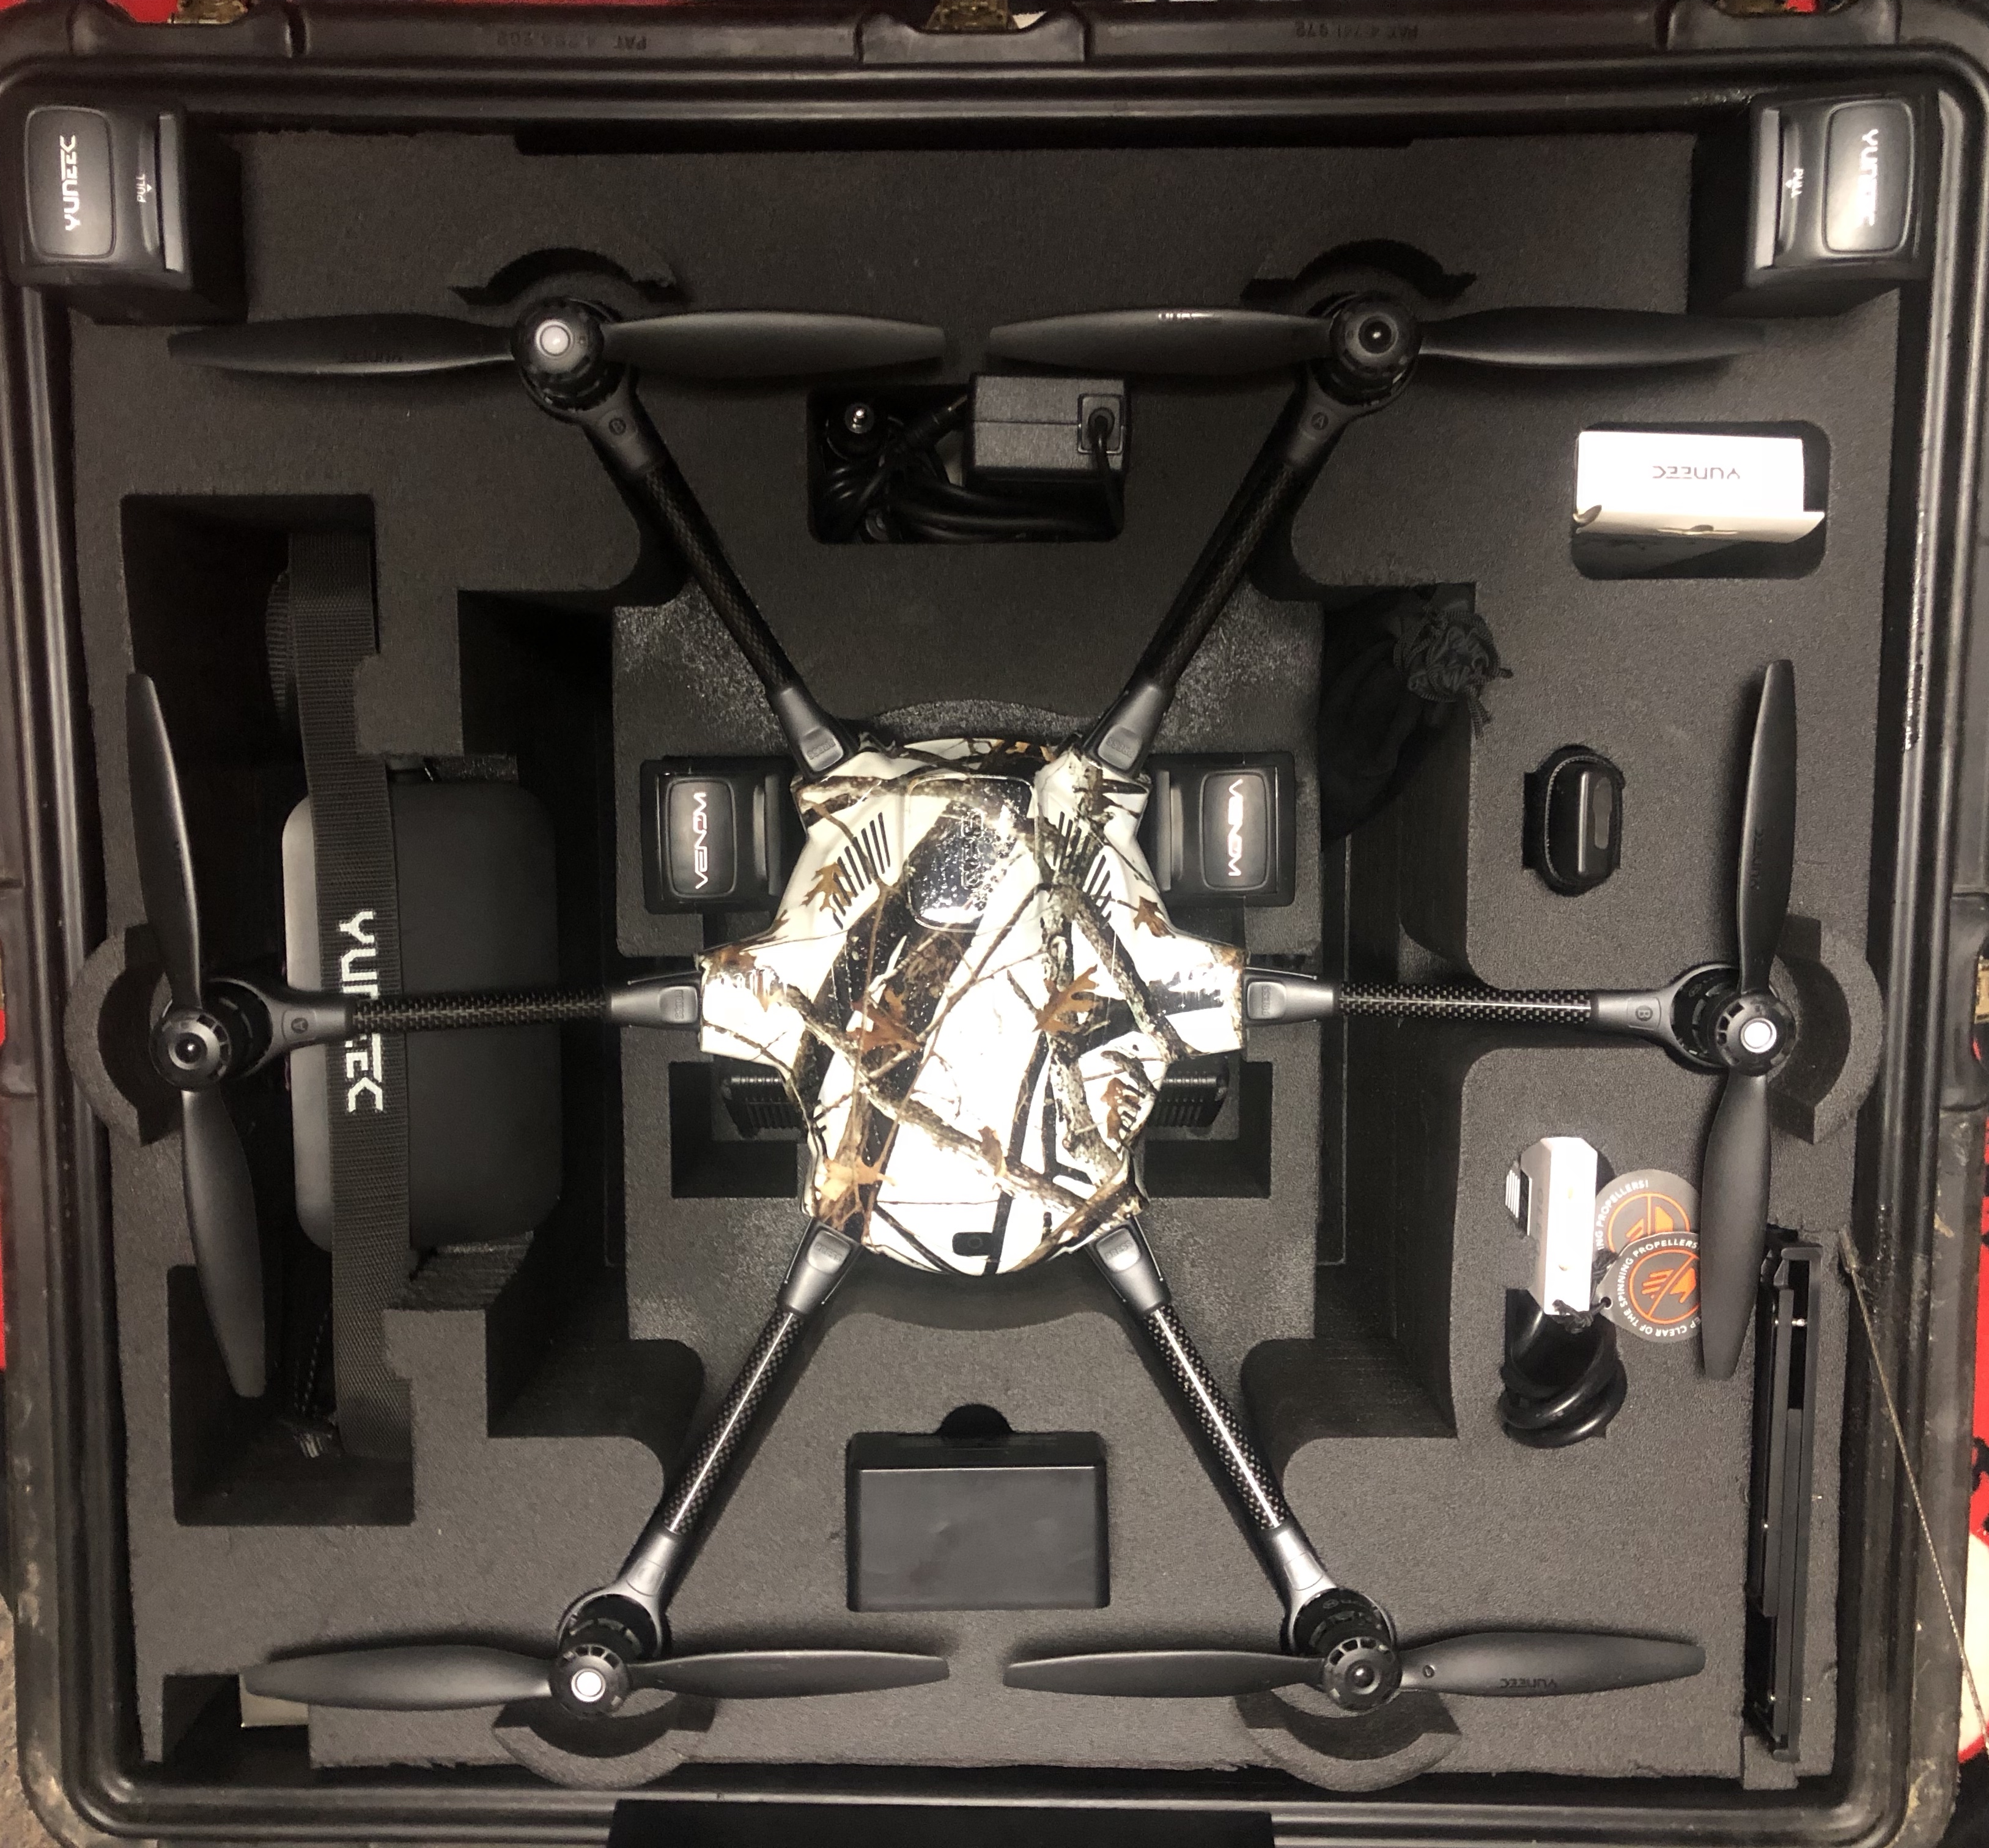 Military issued case for typhoon h